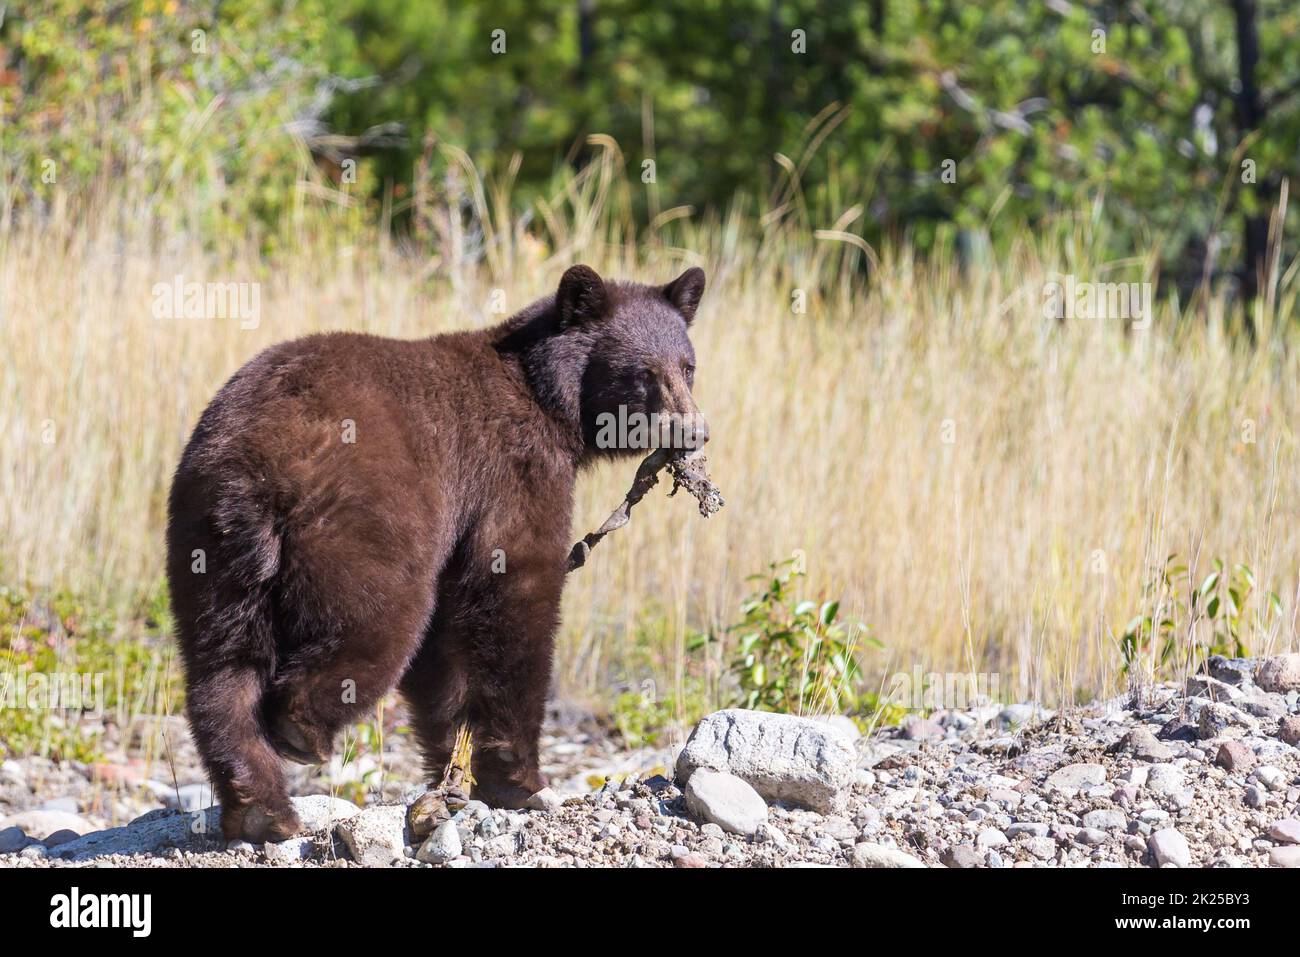 Black bear in the forest, Canada, summer season Stock Photo